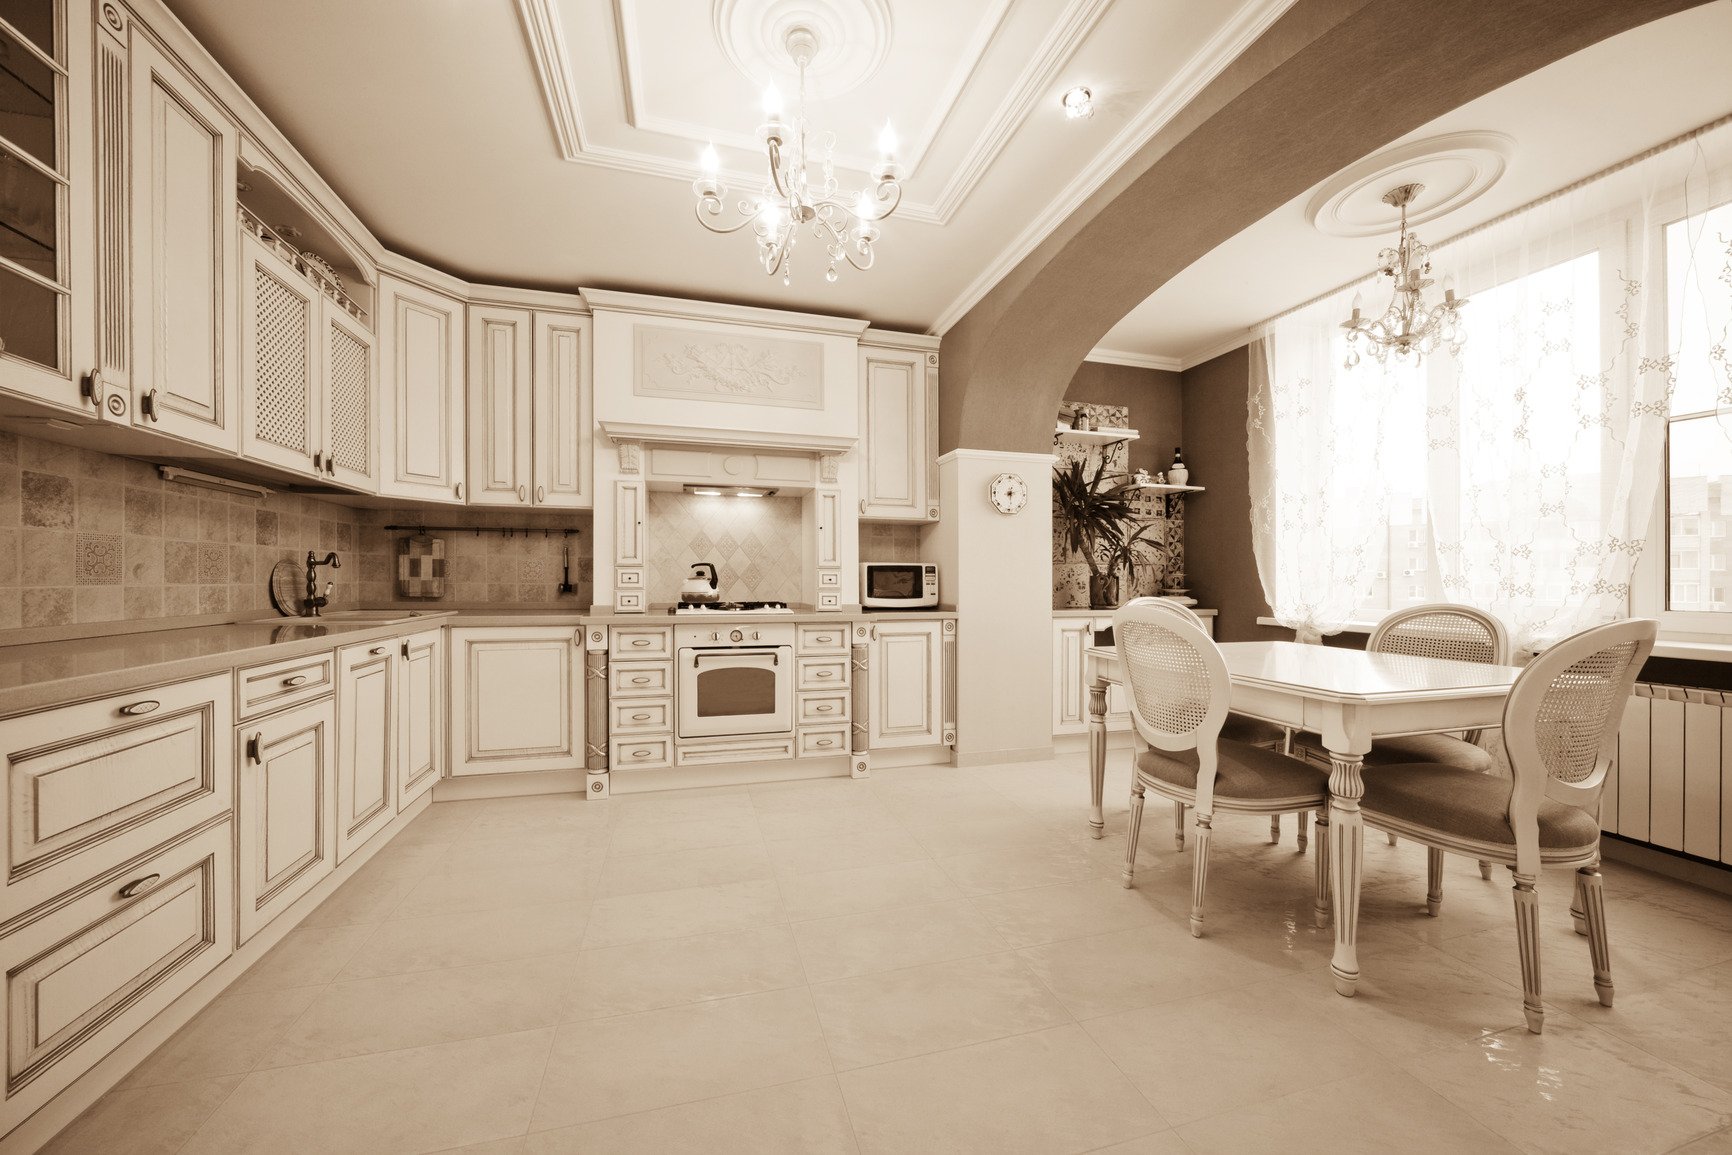 Kitchen Cabinets Surrey BC - Custom Kitchen Cabinets Vancouver North, Burnaby, Lower ...